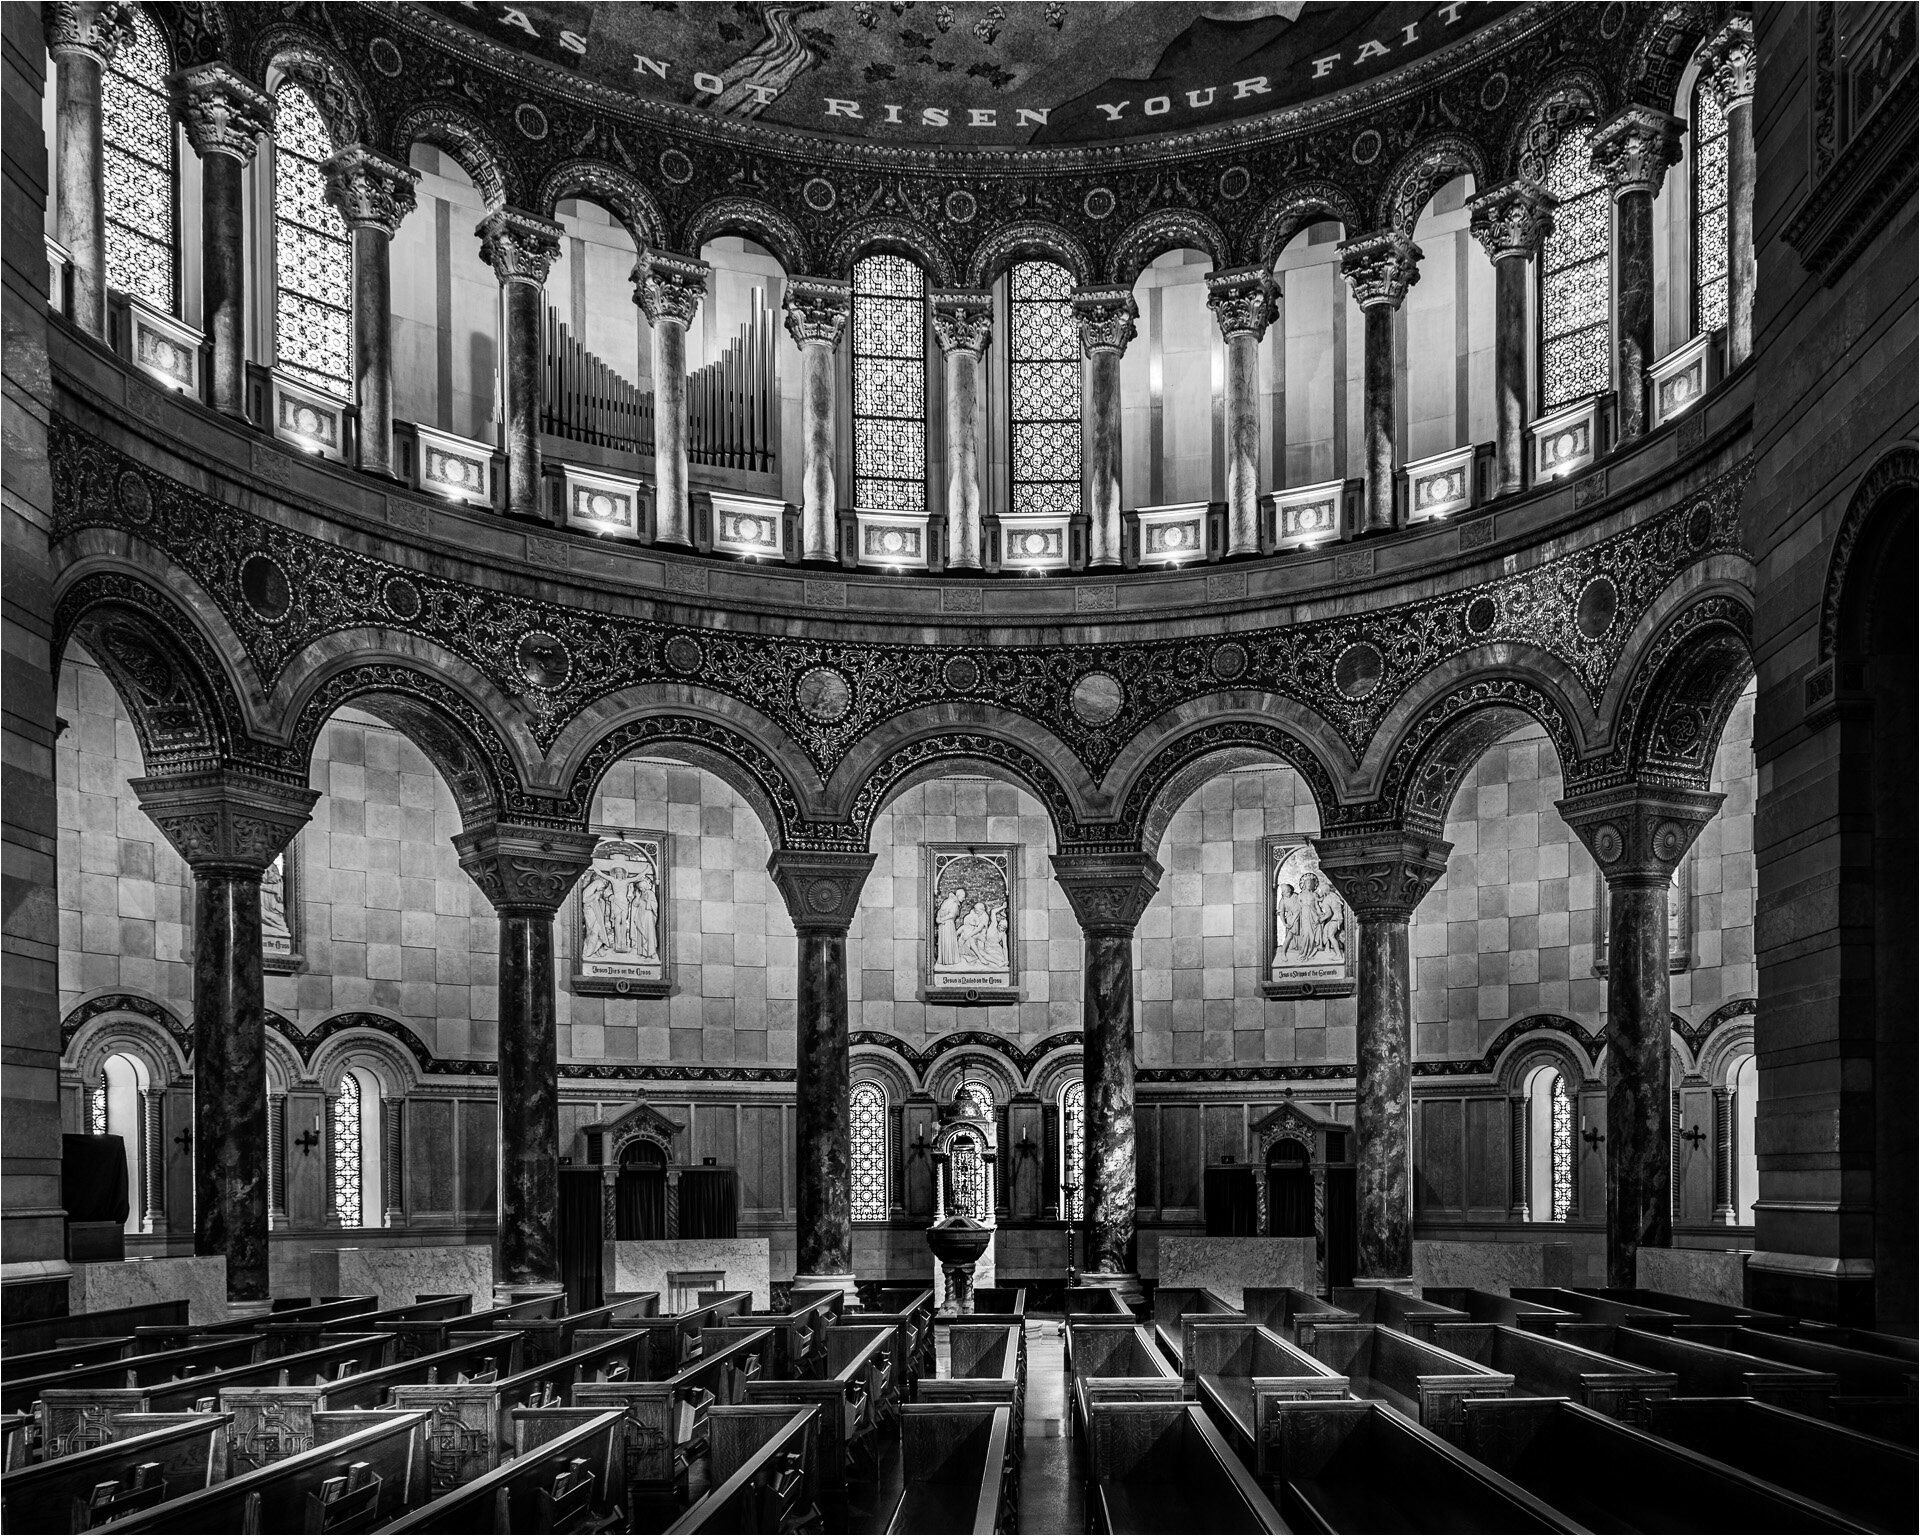 Cathedral Basilica of St. Louis, Number 2, 26"x30", digital photograph, 2019